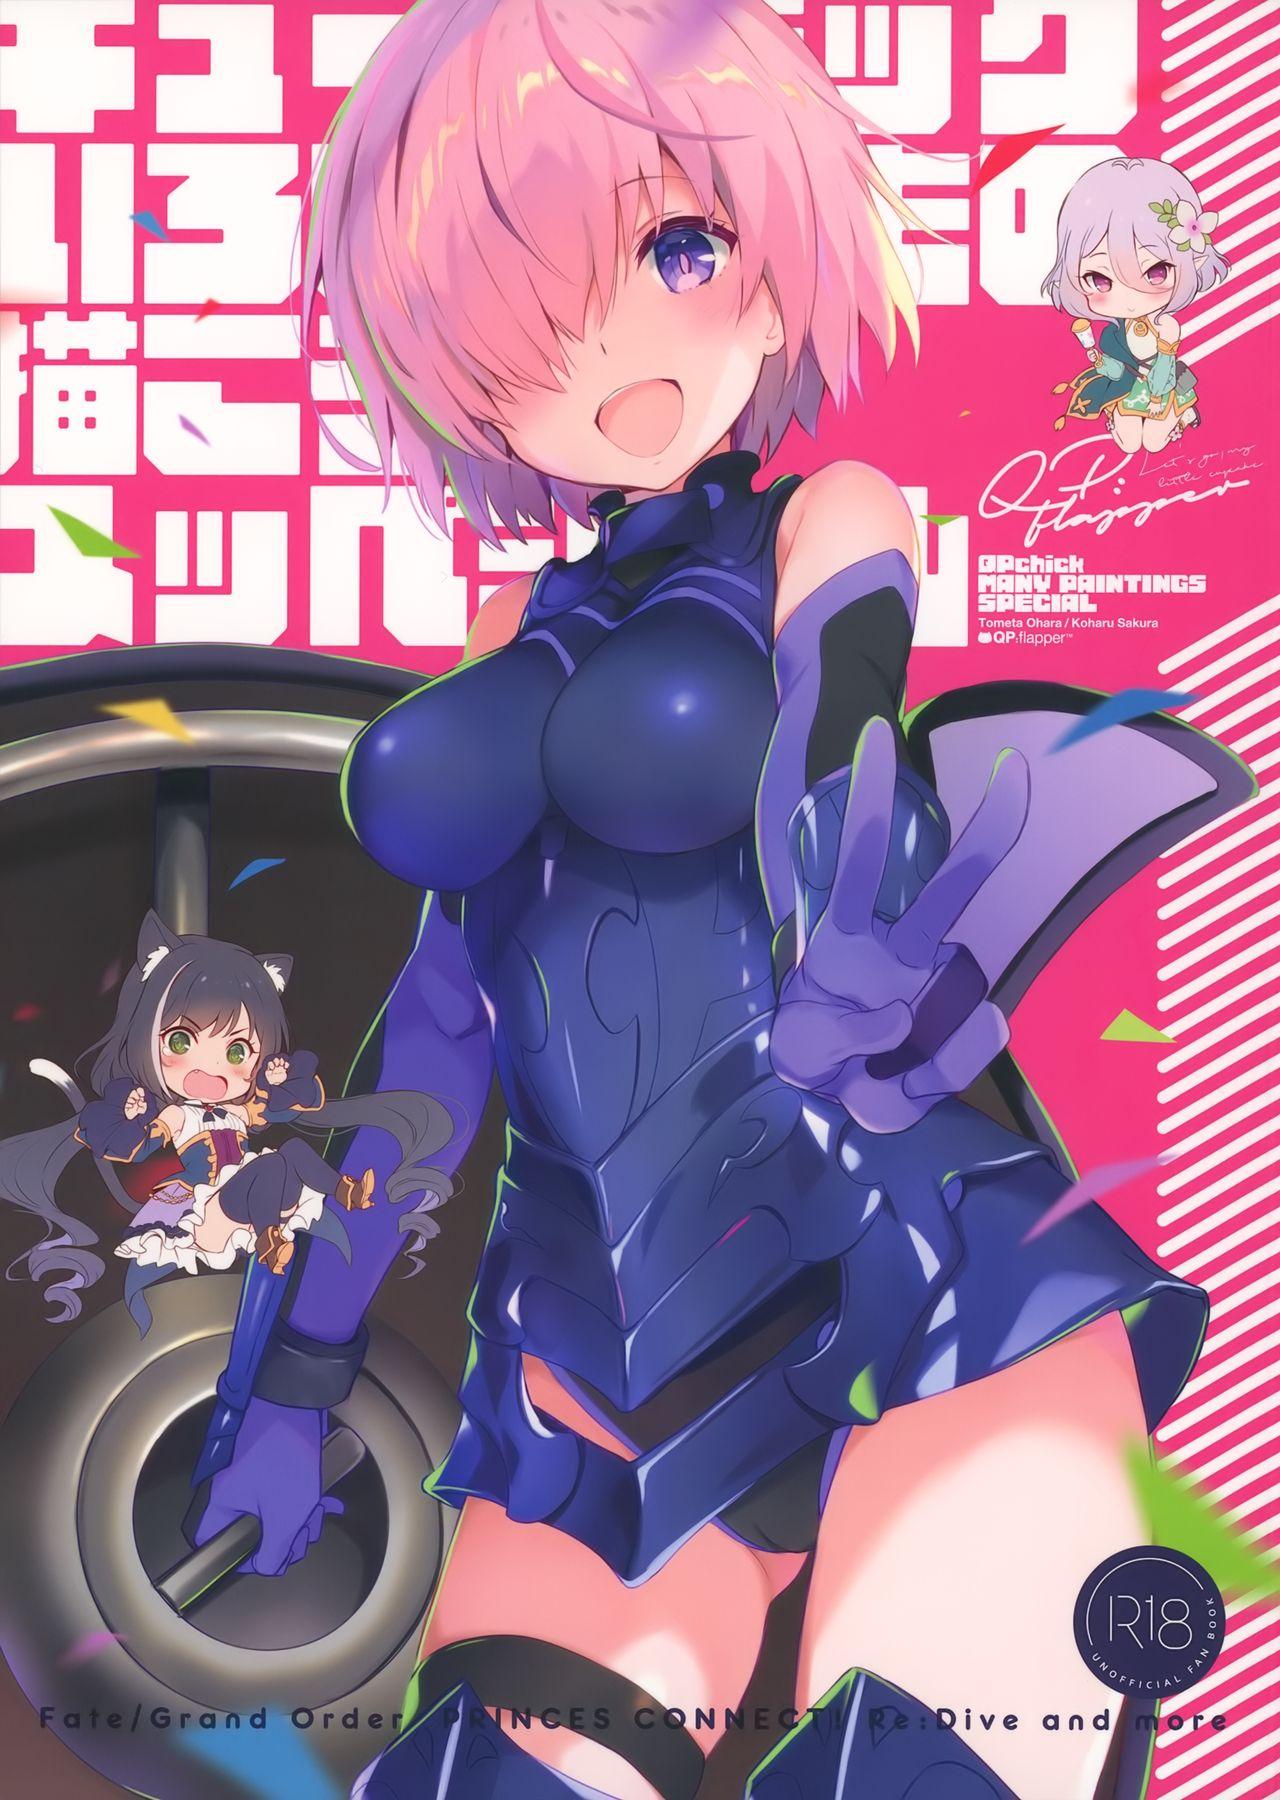 Trannies QPchick Iroiro na Mono Kakou Special - Fate grand order Princess connect Housewife - Picture 1